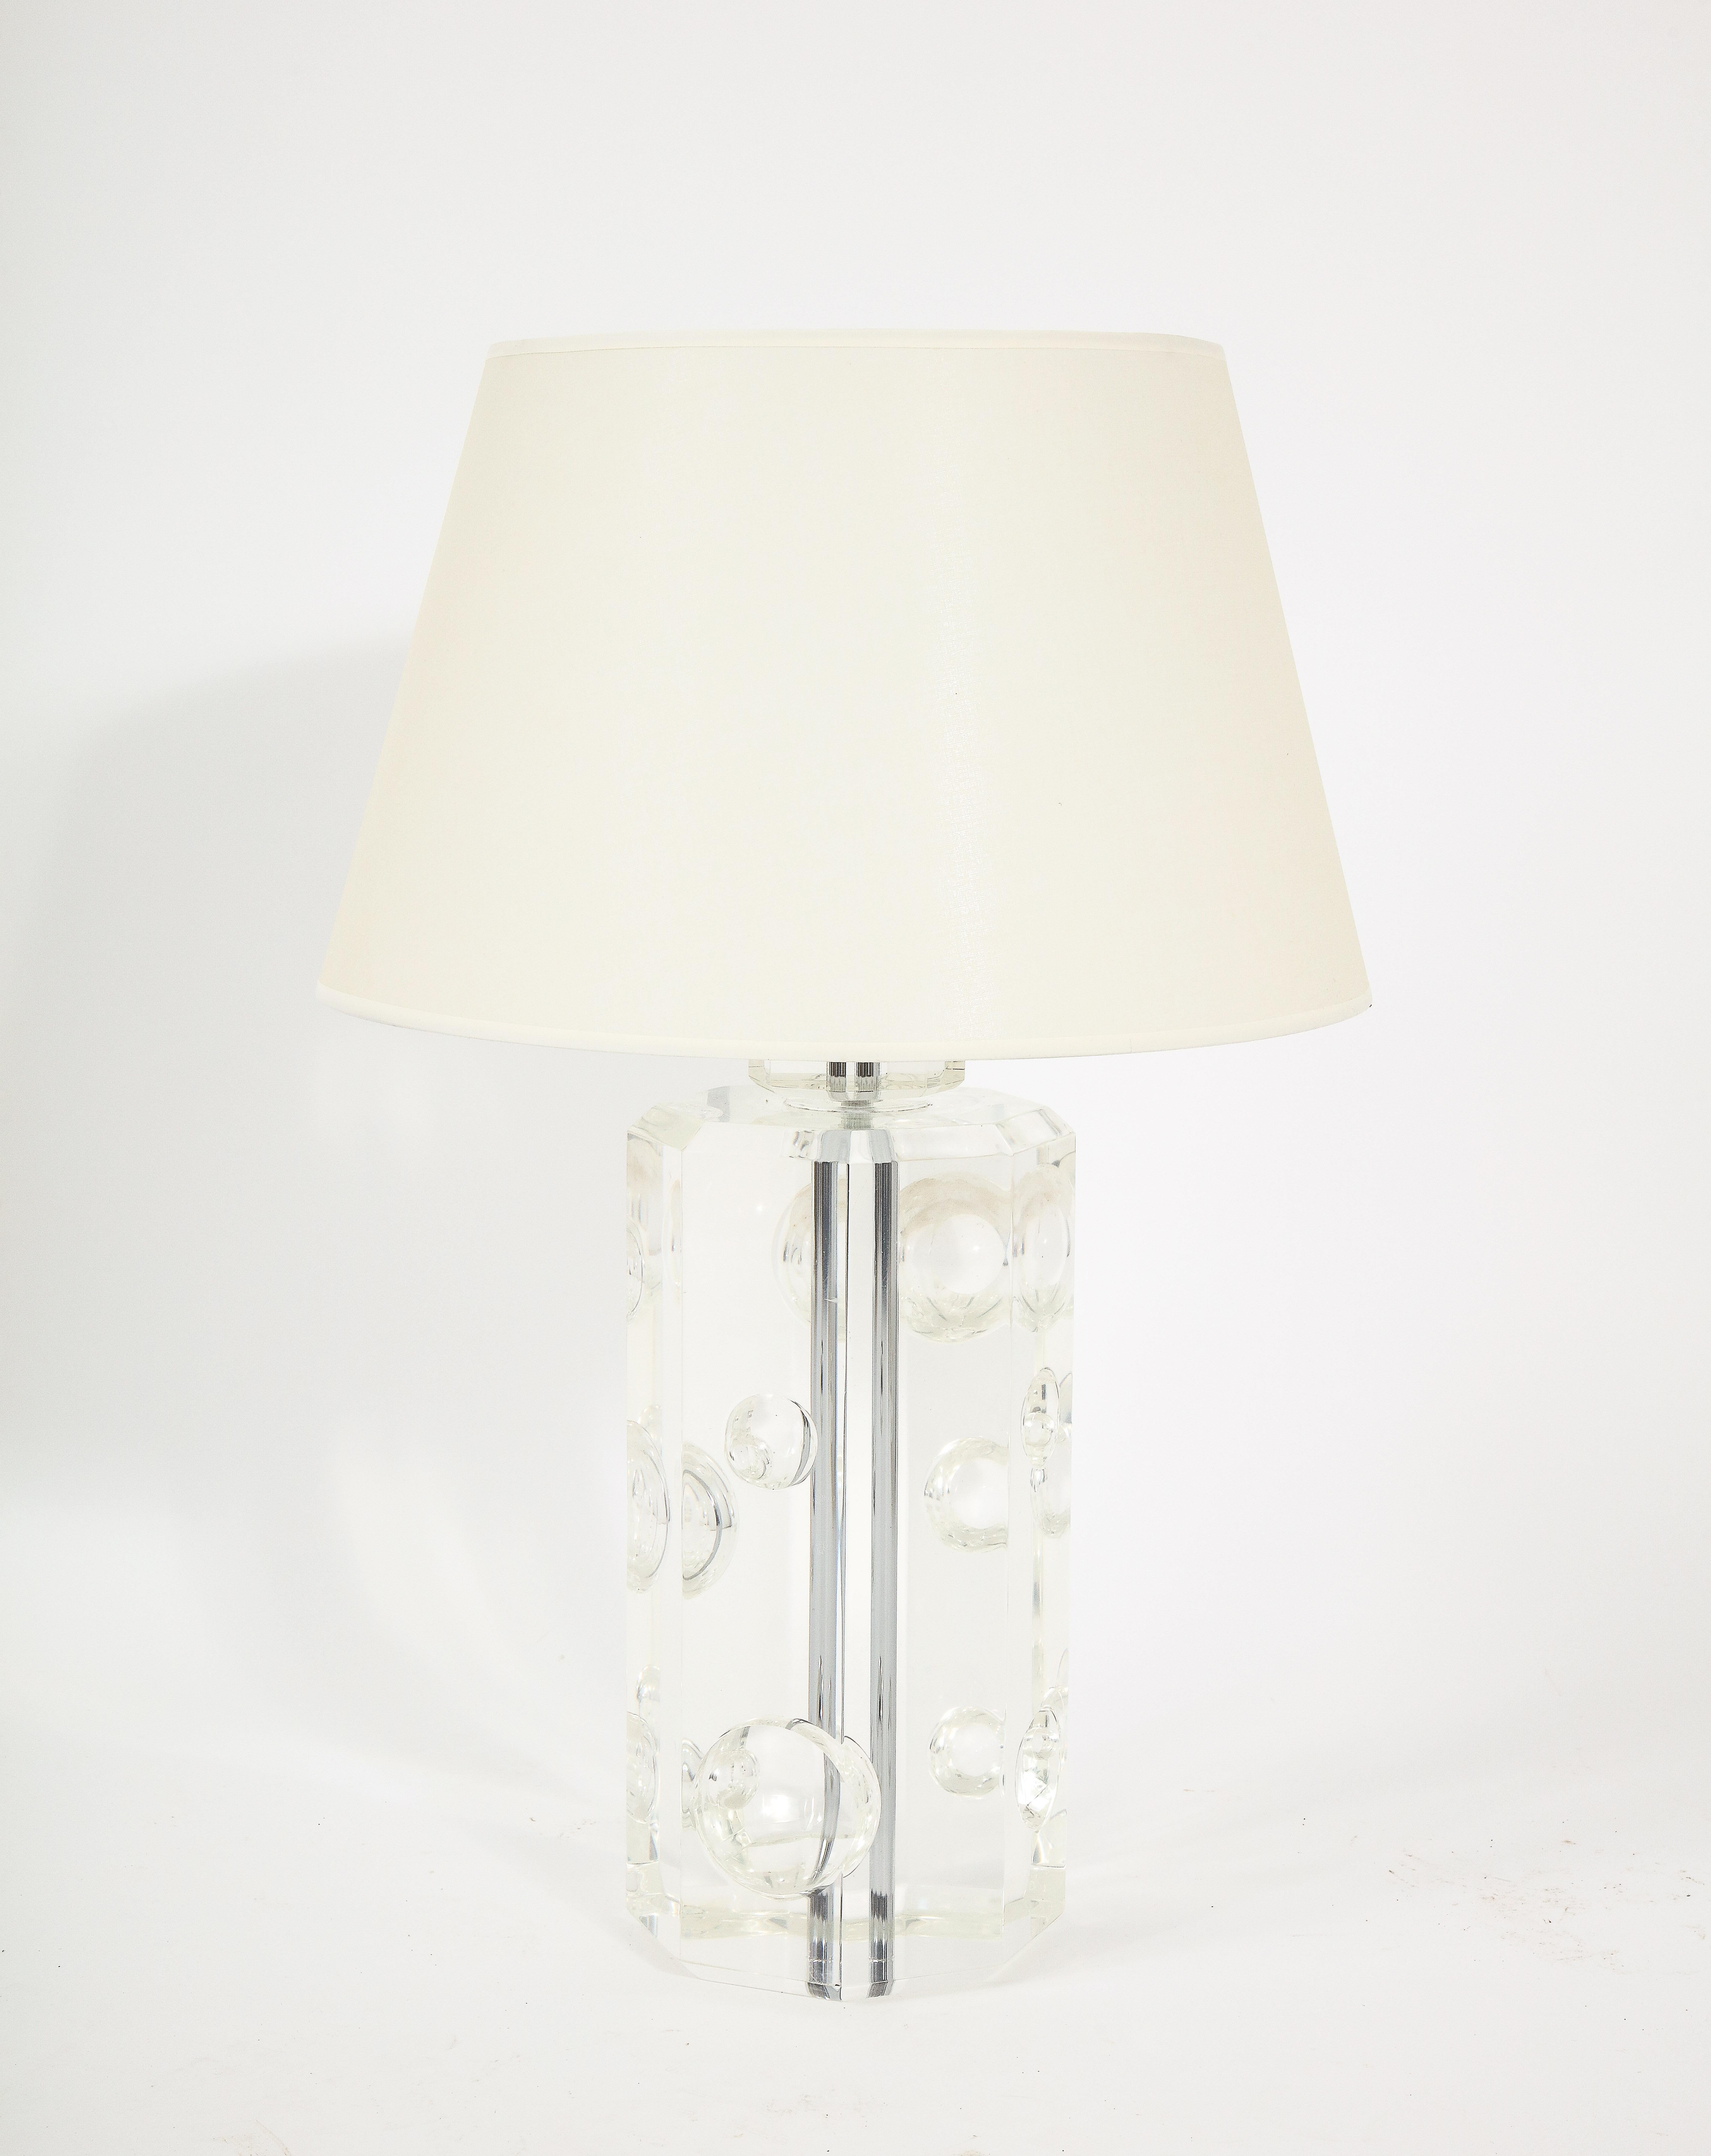 Large Studio Lucite Lamp, USA 1960's For Sale 1